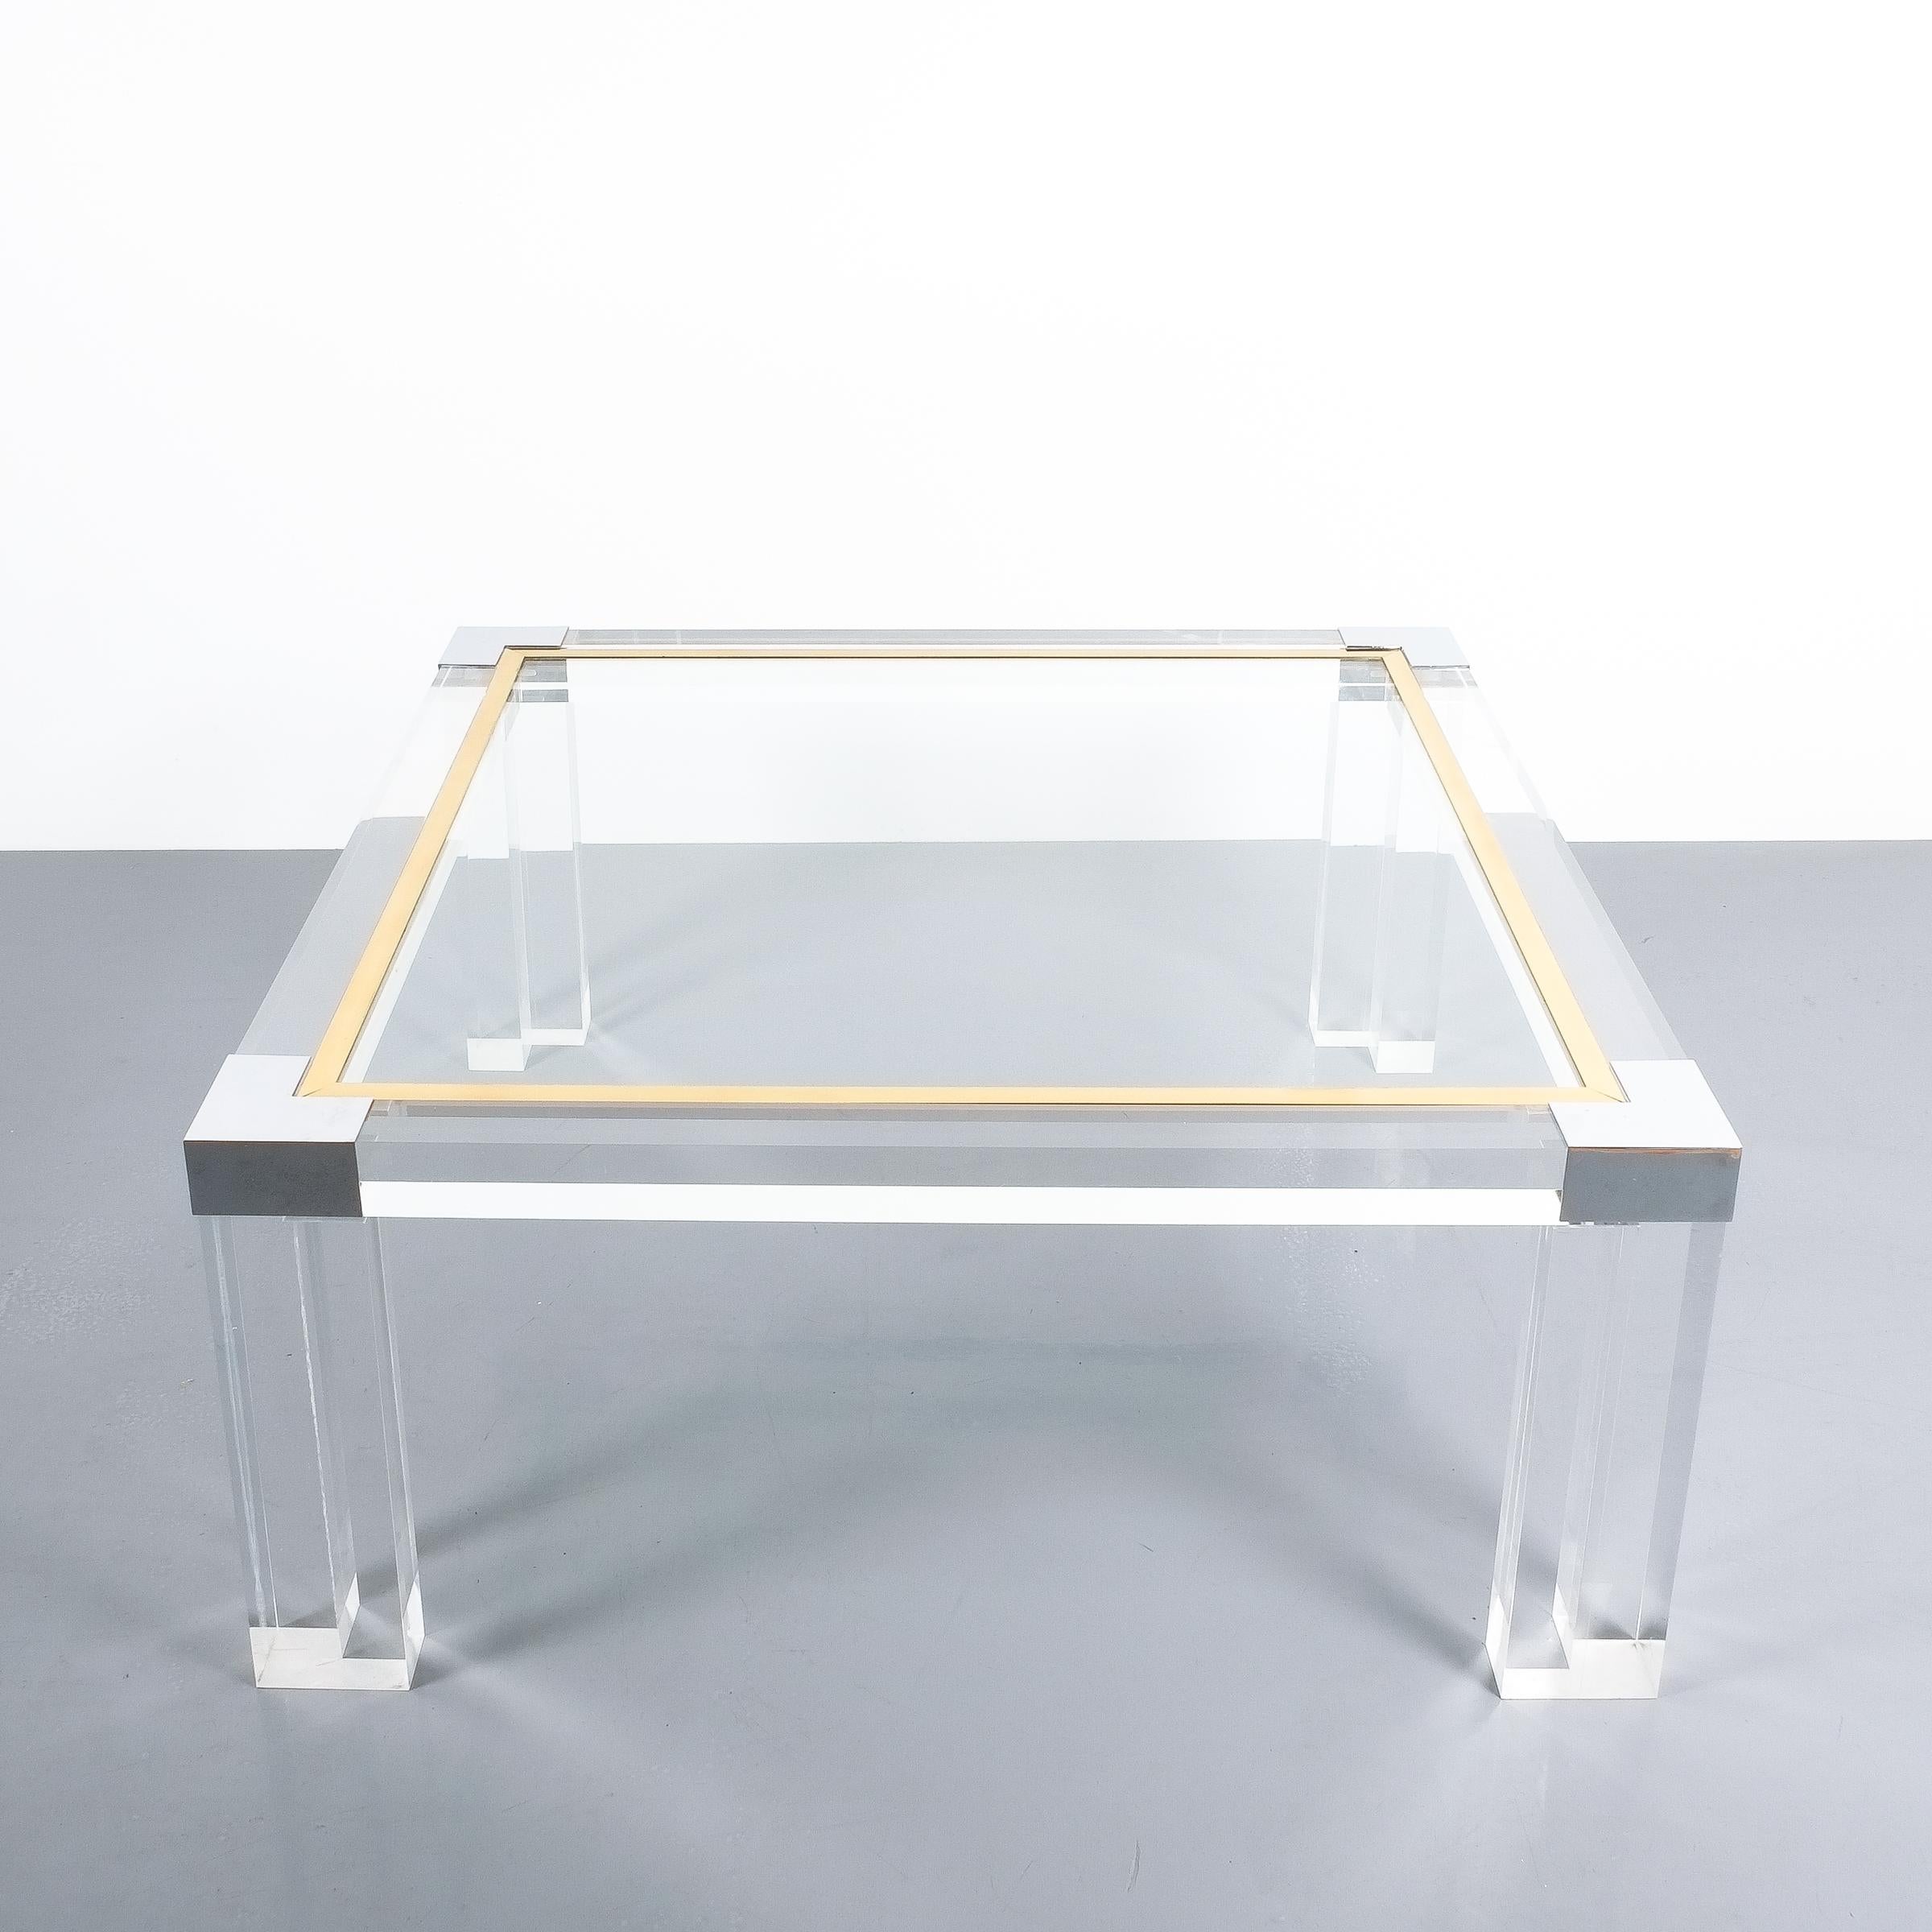 Large Lucite and brass coffee table style Charles Hollis Jones, circa 1970

Nicely sized 36 x 36 inch modernist Lucite coffee or cocktail table featuring solider Lucite and polished brass and chrome accents. Very elegant piece in very good